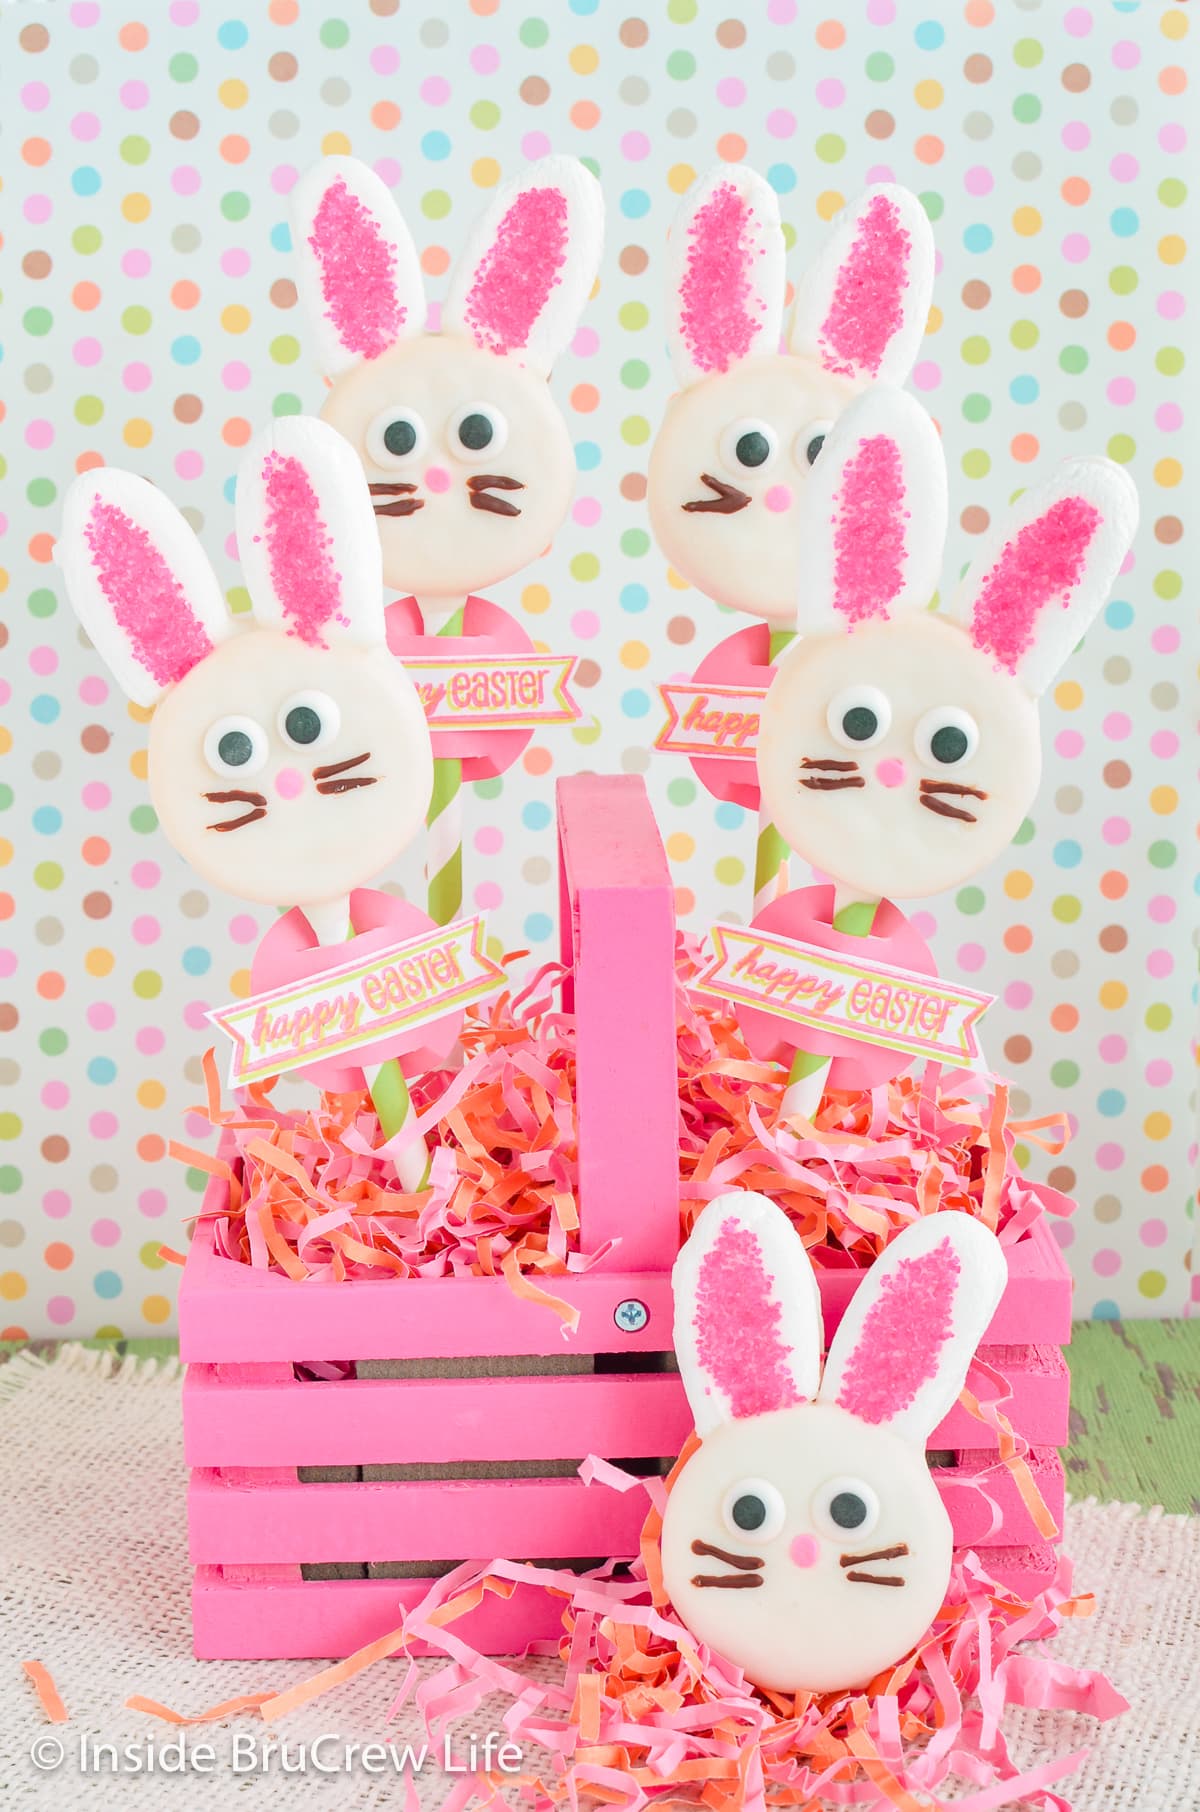 Pink basket with Oreo bunny pops stuck in it.